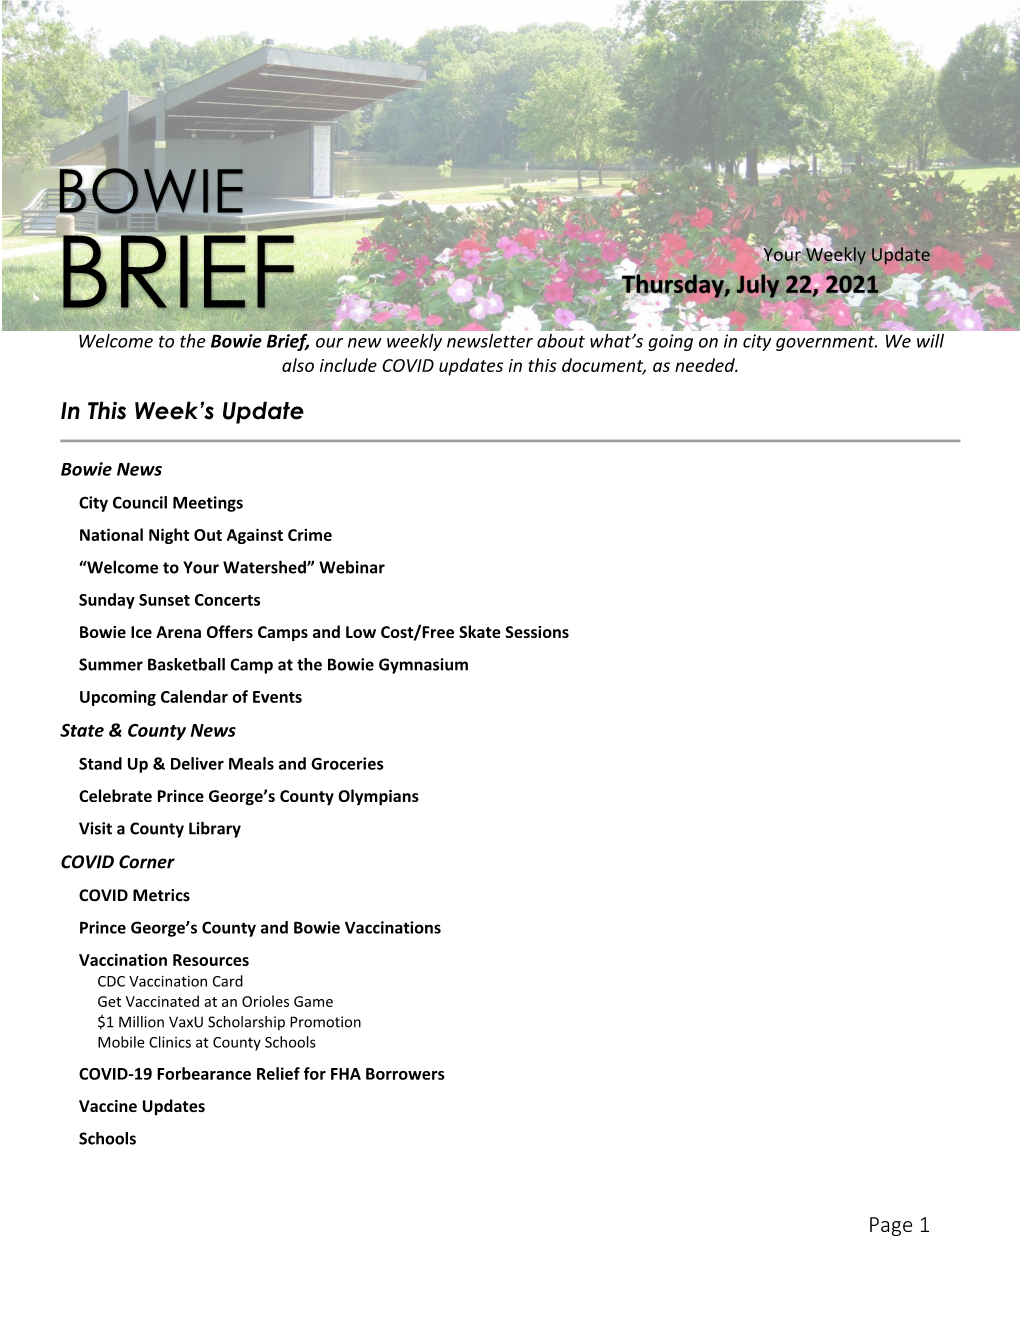 Thursday, July 22, 2021 Welcome to the Bowie Brief, Our New Weekly Newsletter About What’S Going on in City Government